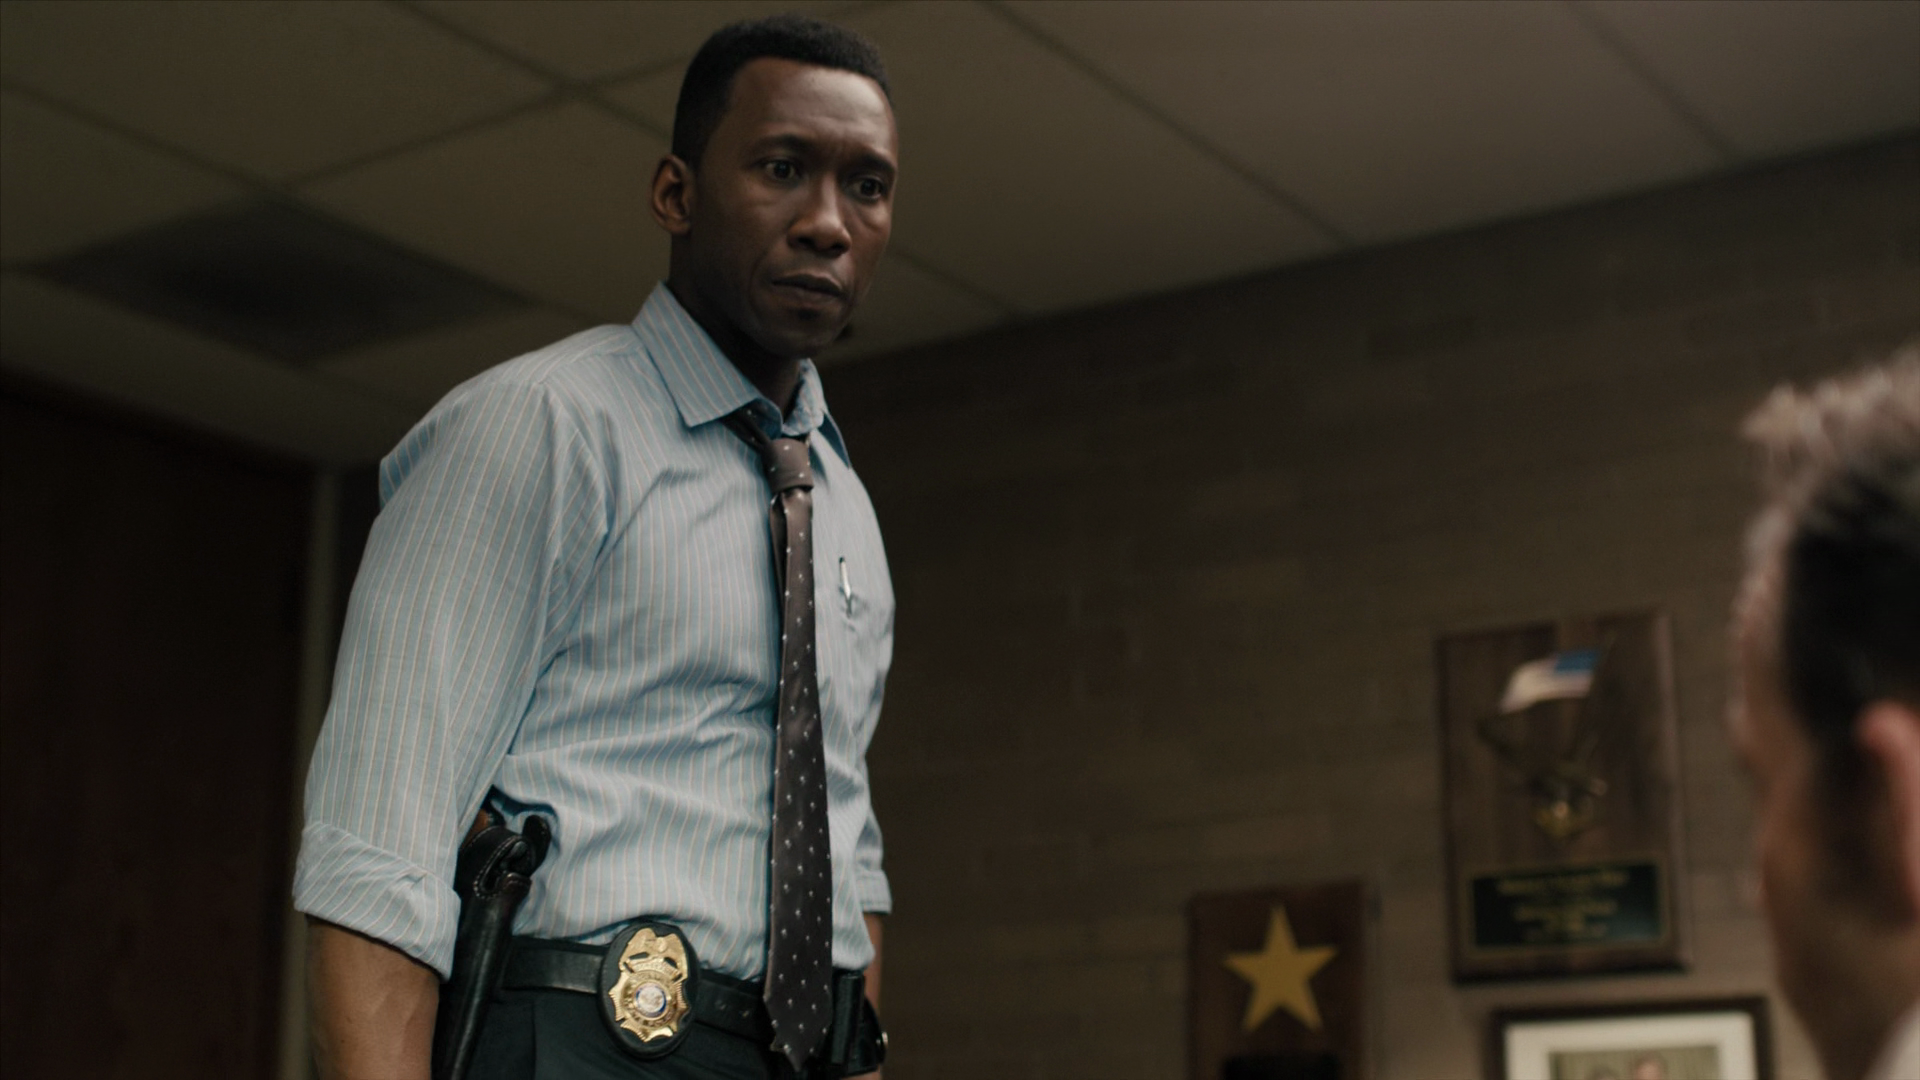 Detective Hays (Mahershala Ali) uncovers evidence of police corruption in True Detective Season 3 Episode 5 "If You Have Ghosts" (2019), HBO